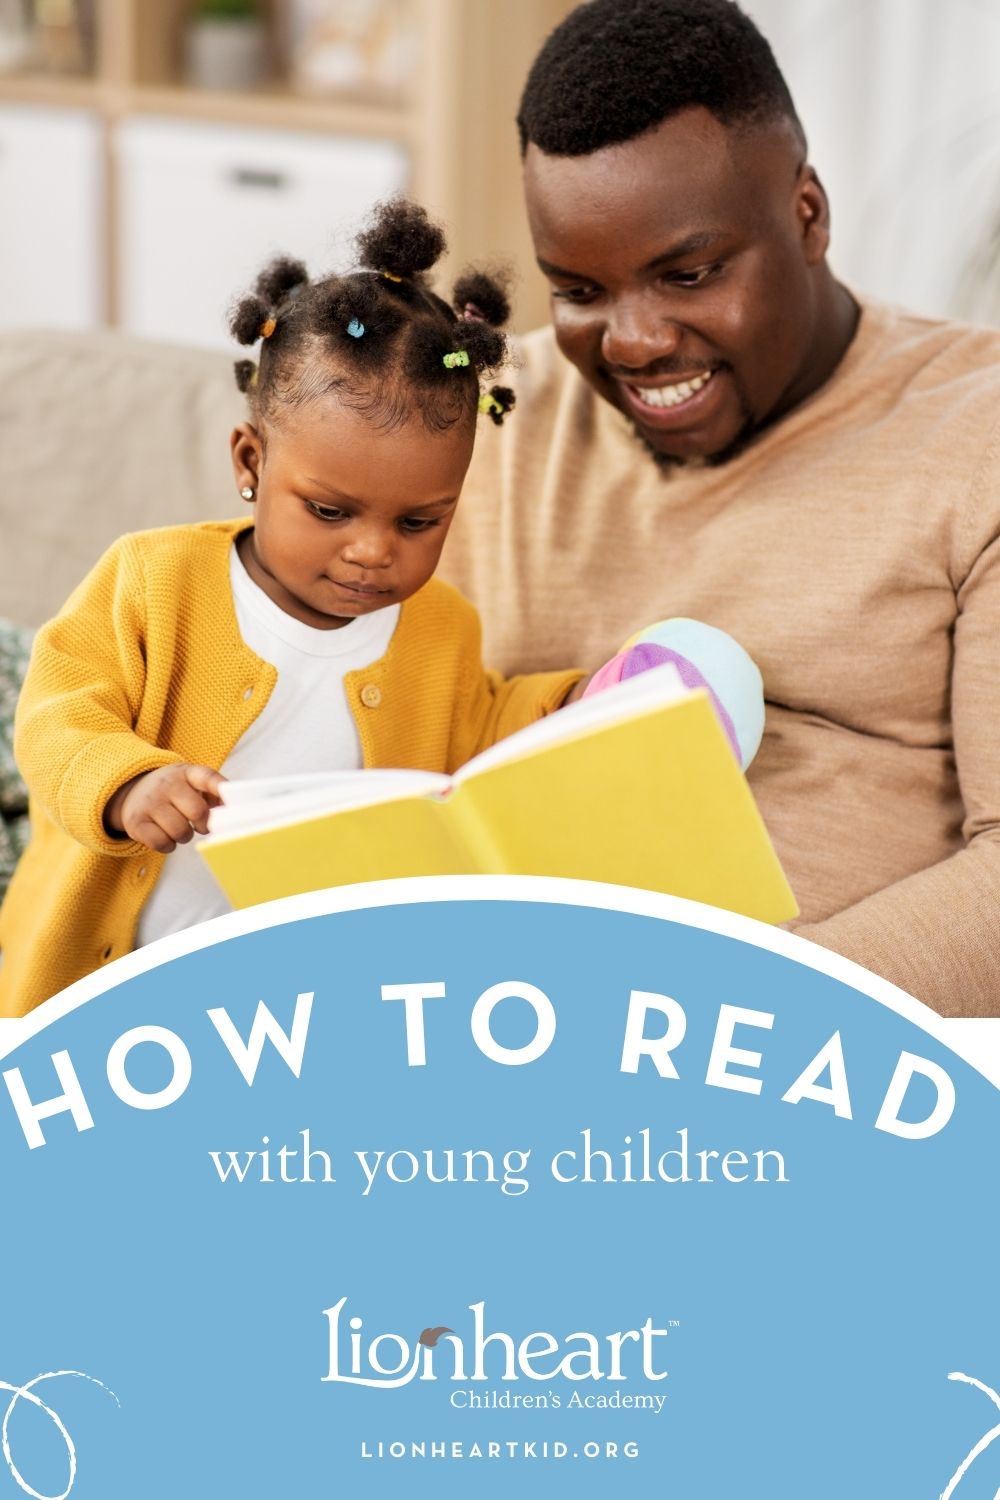 A father reads with his toddler daughter on top of an image promoting a blog on reading with young children